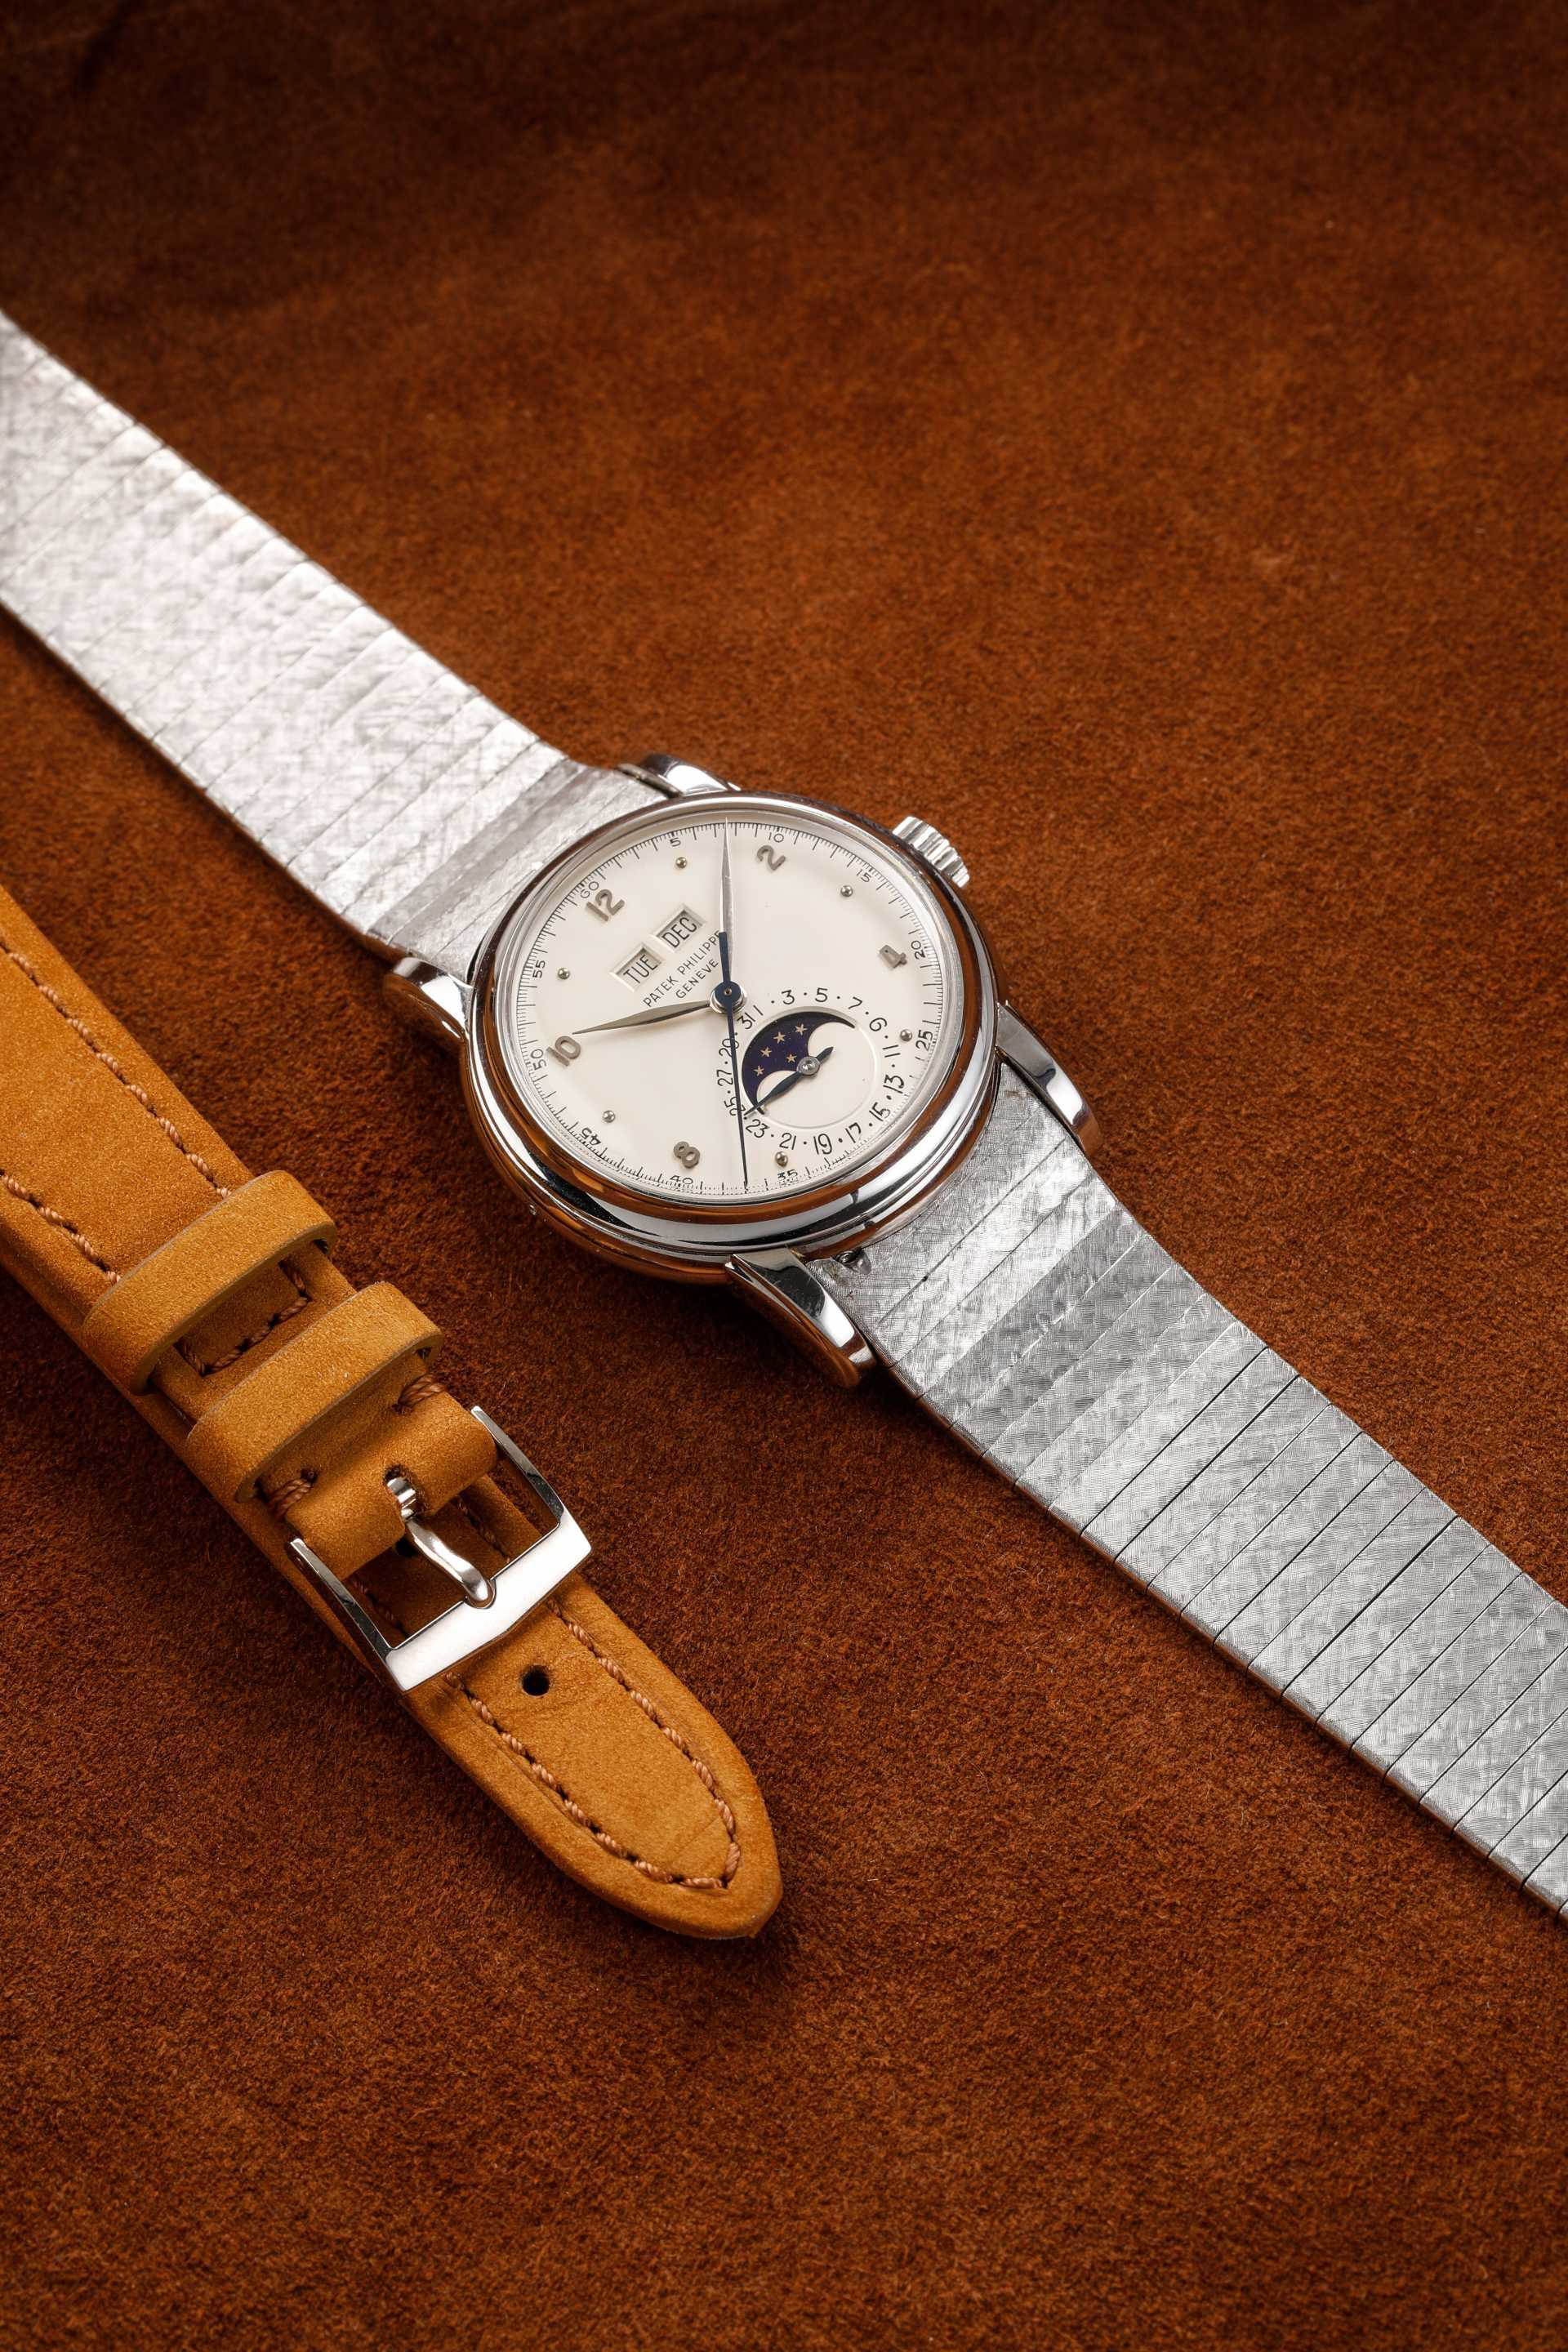 Patek Philippe Ref. 2497 “The Exceptional White” watch